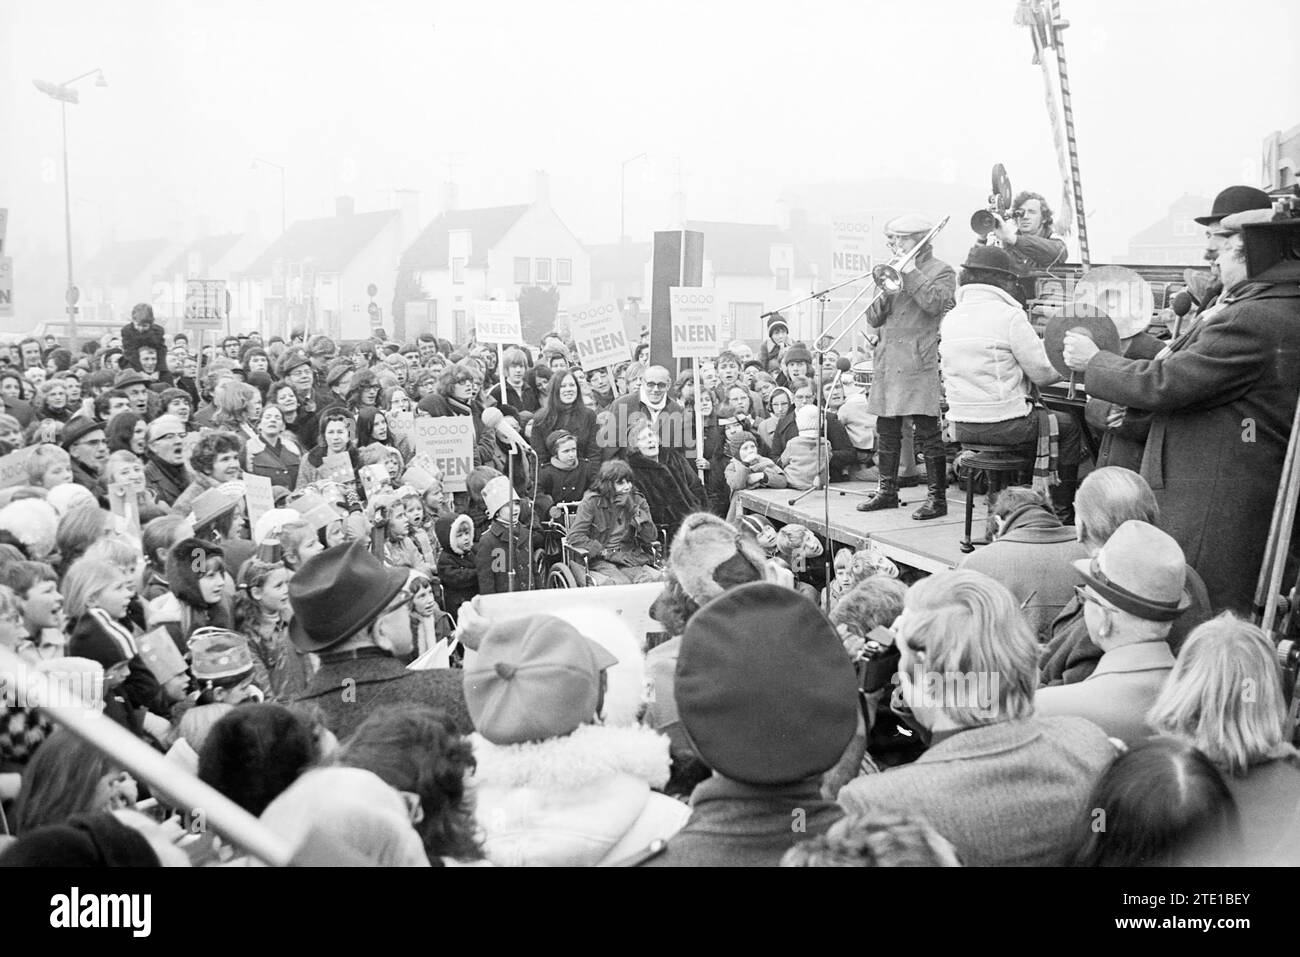 Farce Majeure Wijk aan Zee Television, Wijk aan Zee, 21-01-1972, Whizgle News from the Past, Tailored for the Future. Explore historical narratives, Dutch The Netherlands agency image with a modern perspective, bridging the gap between yesterday's events and tomorrow's insights. A timeless journey shaping the stories that shape our future. Stock Photo